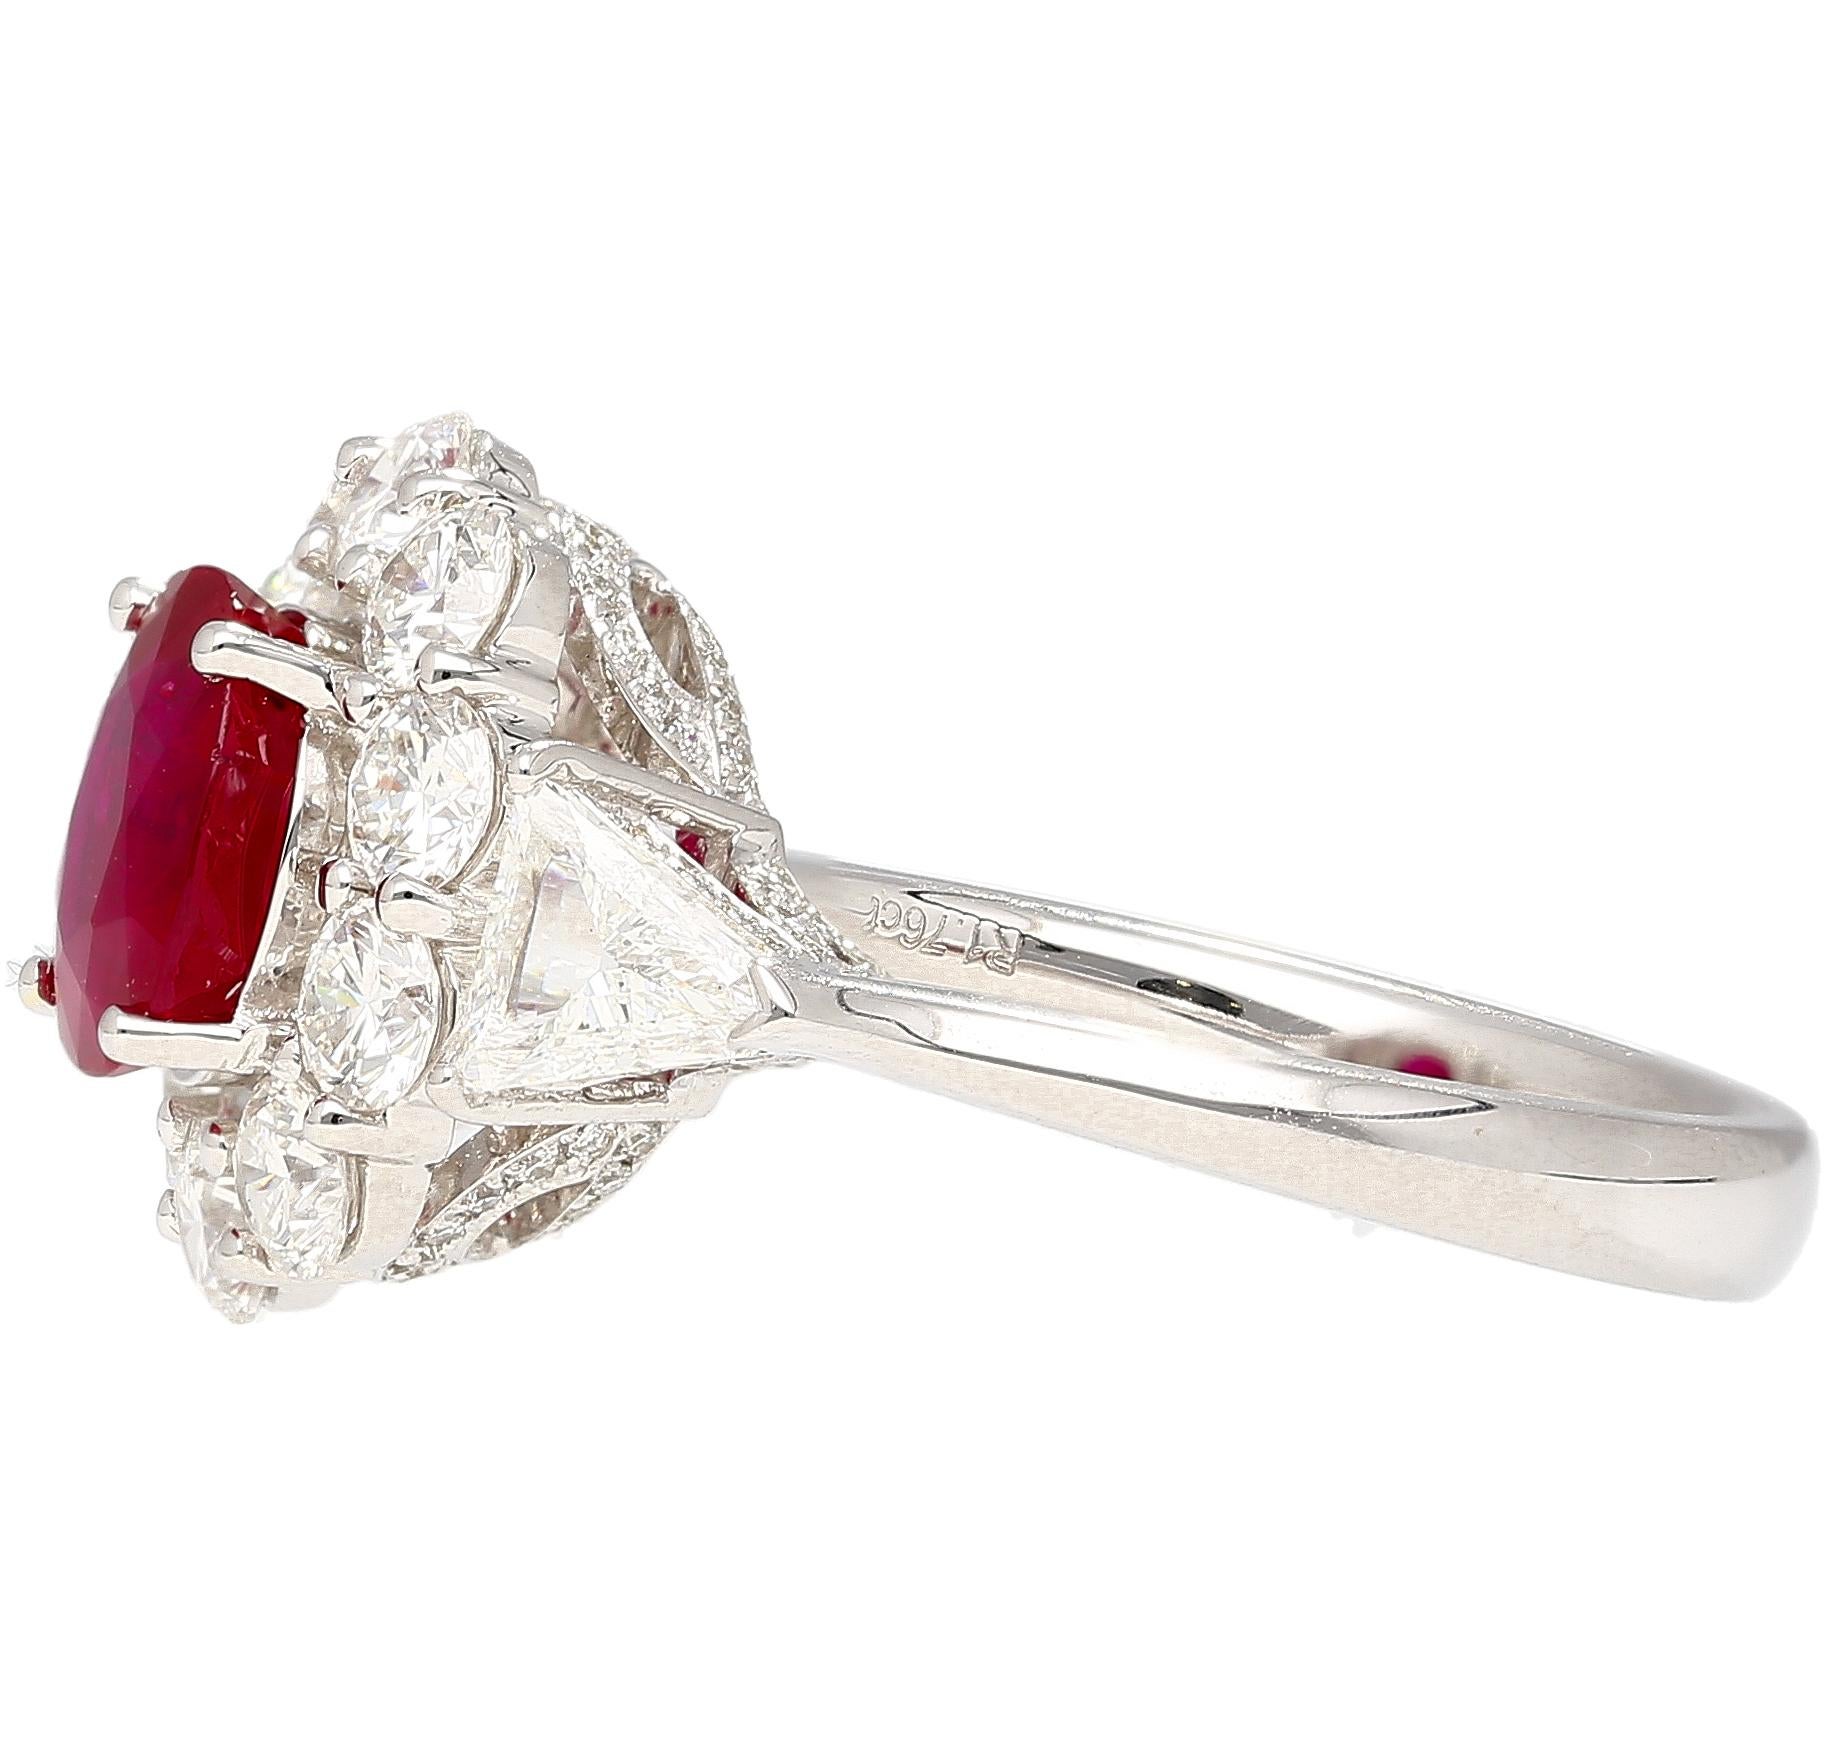 AGL Certified 1.76 Carat Cushion Cut Pigeon's Blood Red No Heat Burma Ruby & Diamond Ring in 18k White Gold. Set with a round cut diamond halo and two trillion cut side stones.

The Ruby is a true gem. Known in the trade as a pigeon's blood red